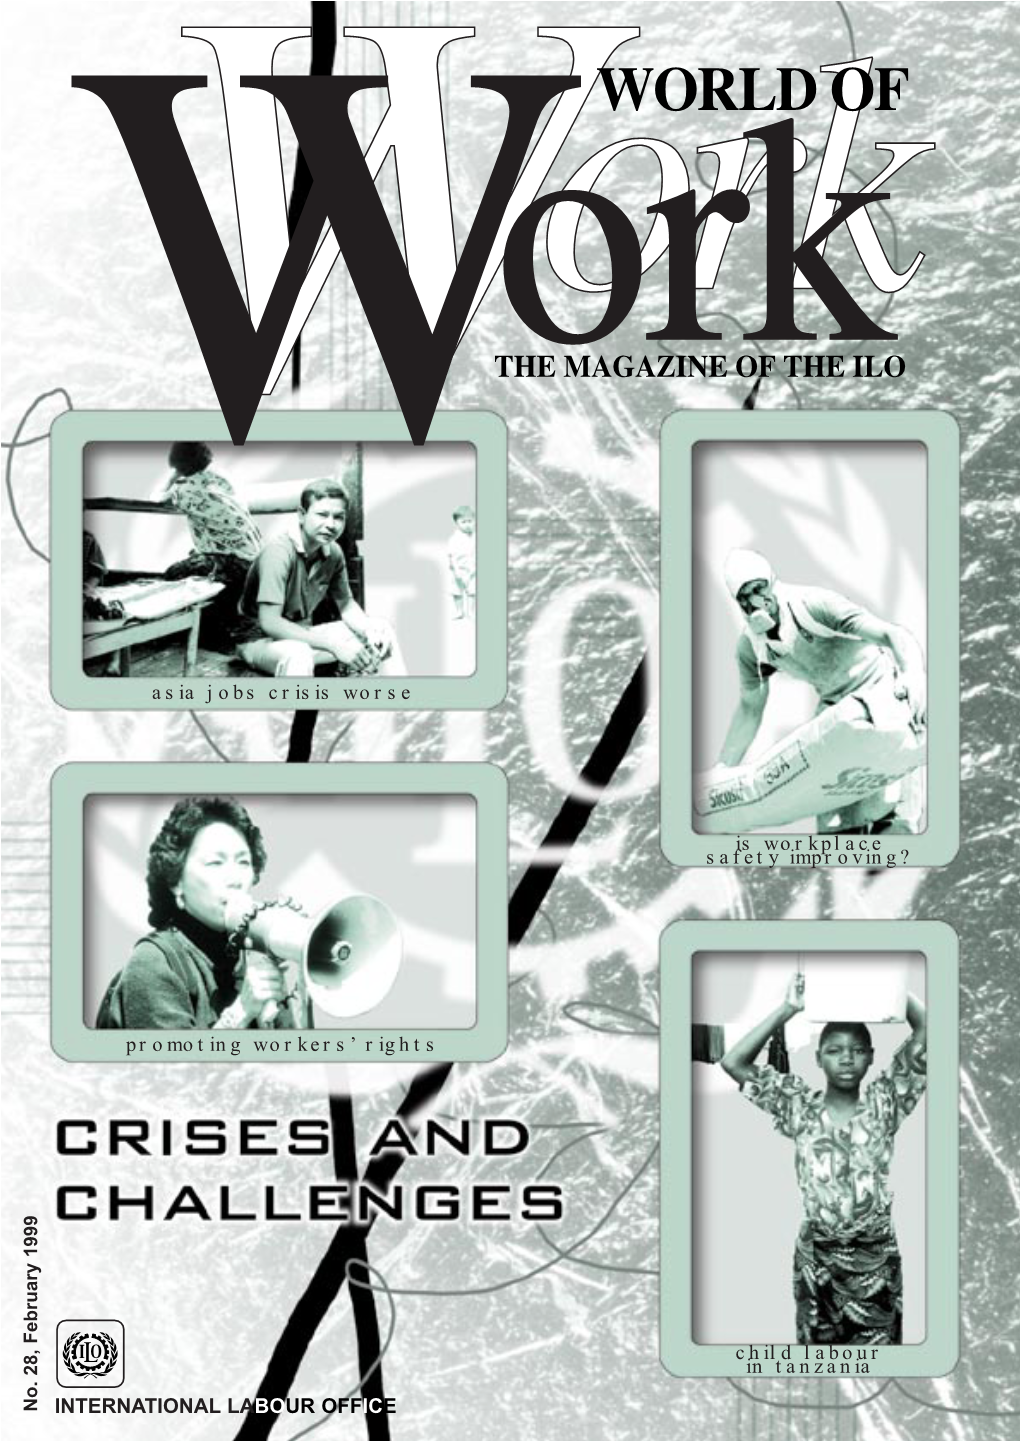 Child Labour in Tanzania WORLD of Workork Worldw of Work Magazine Is Published Five Times Per Year by the Bureau of Public Information of the ILO in Geneva